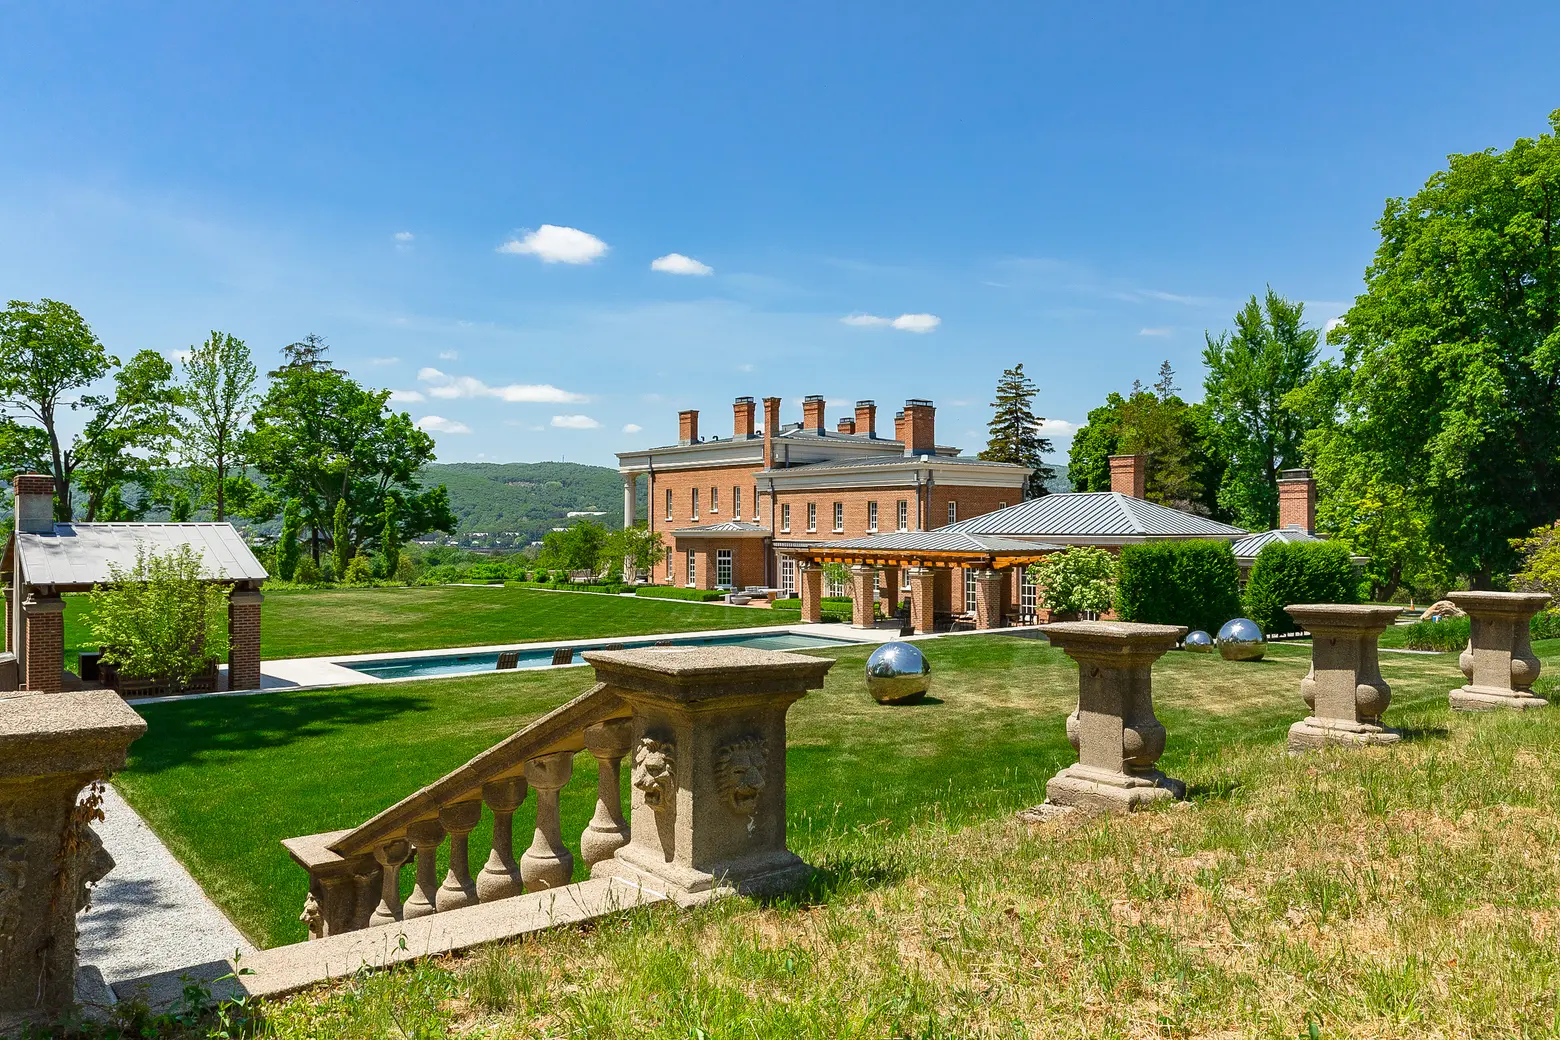 Upstate’s 16-acre Sloan Estate lists for $11M, a rare chance to own a historic mansion